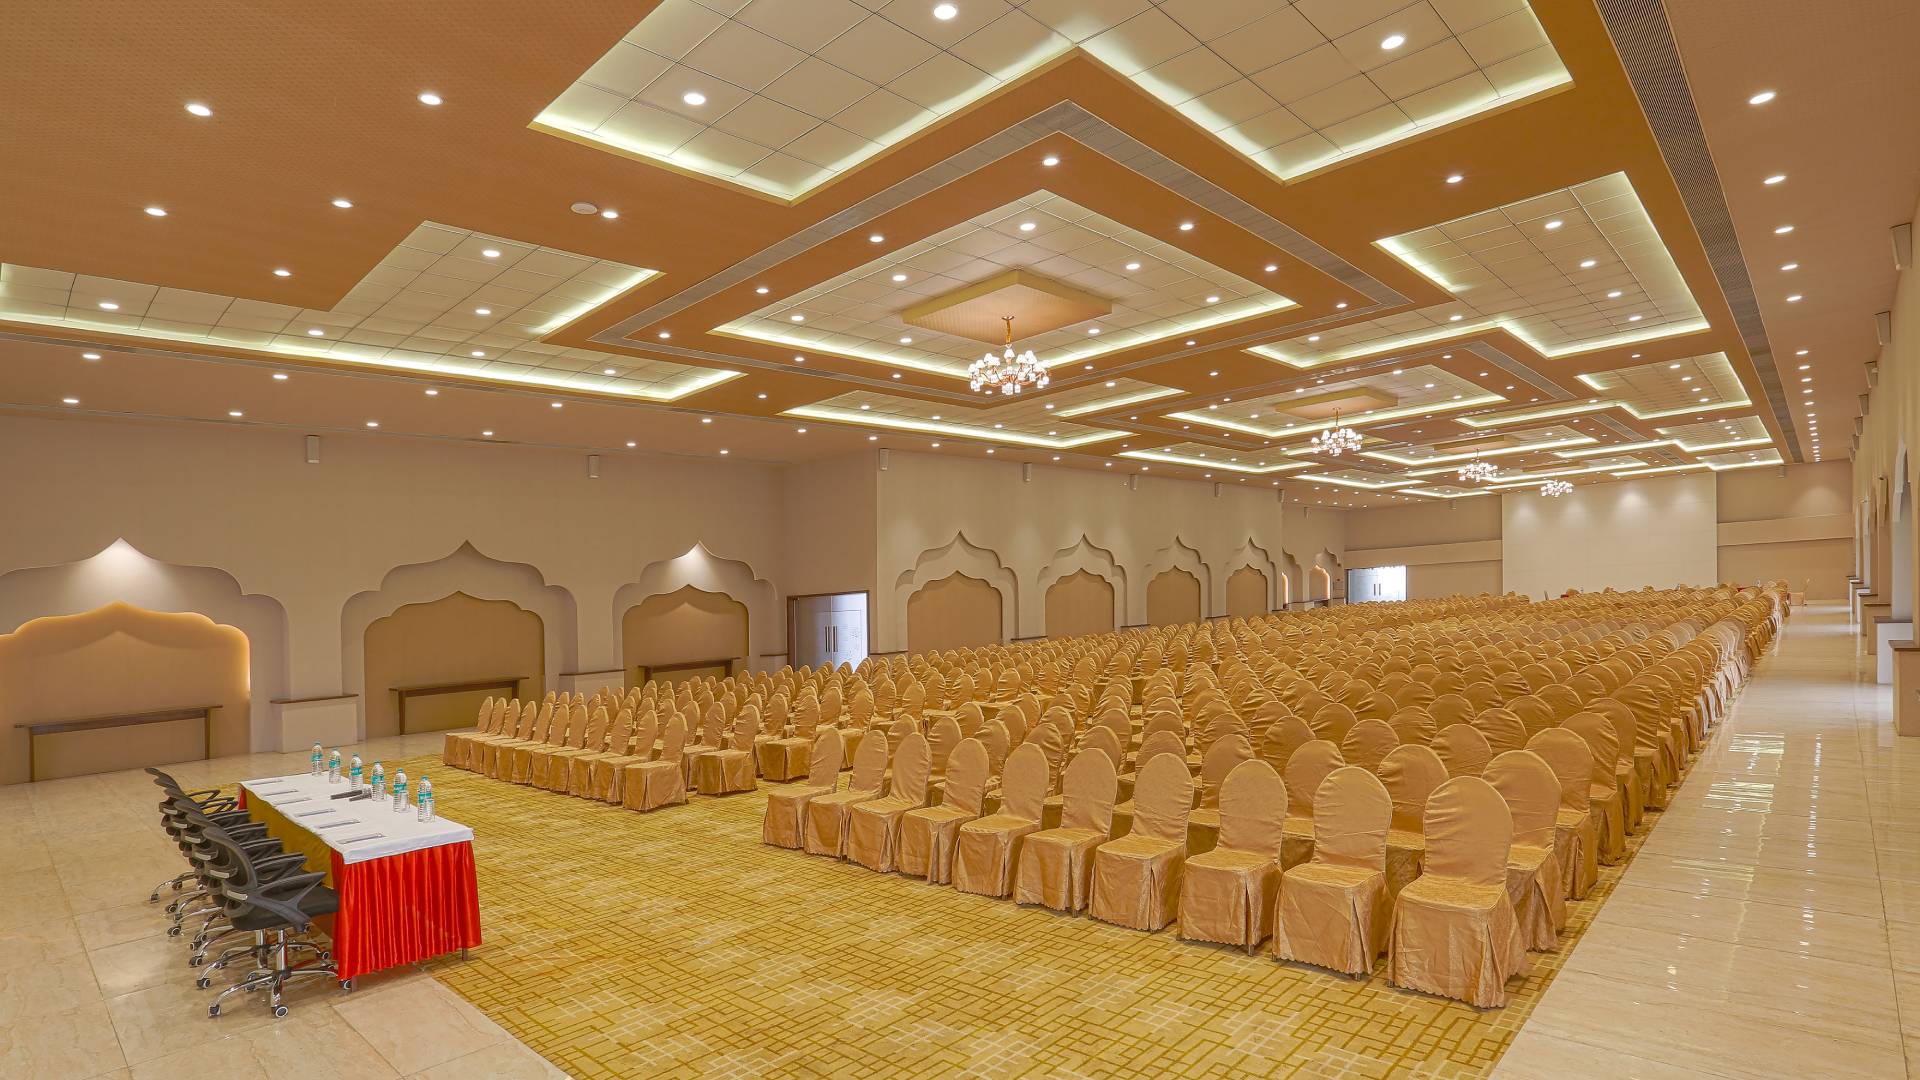 The Kohinoor - Ac Banquet Hall at Sunny's World Pune (3)